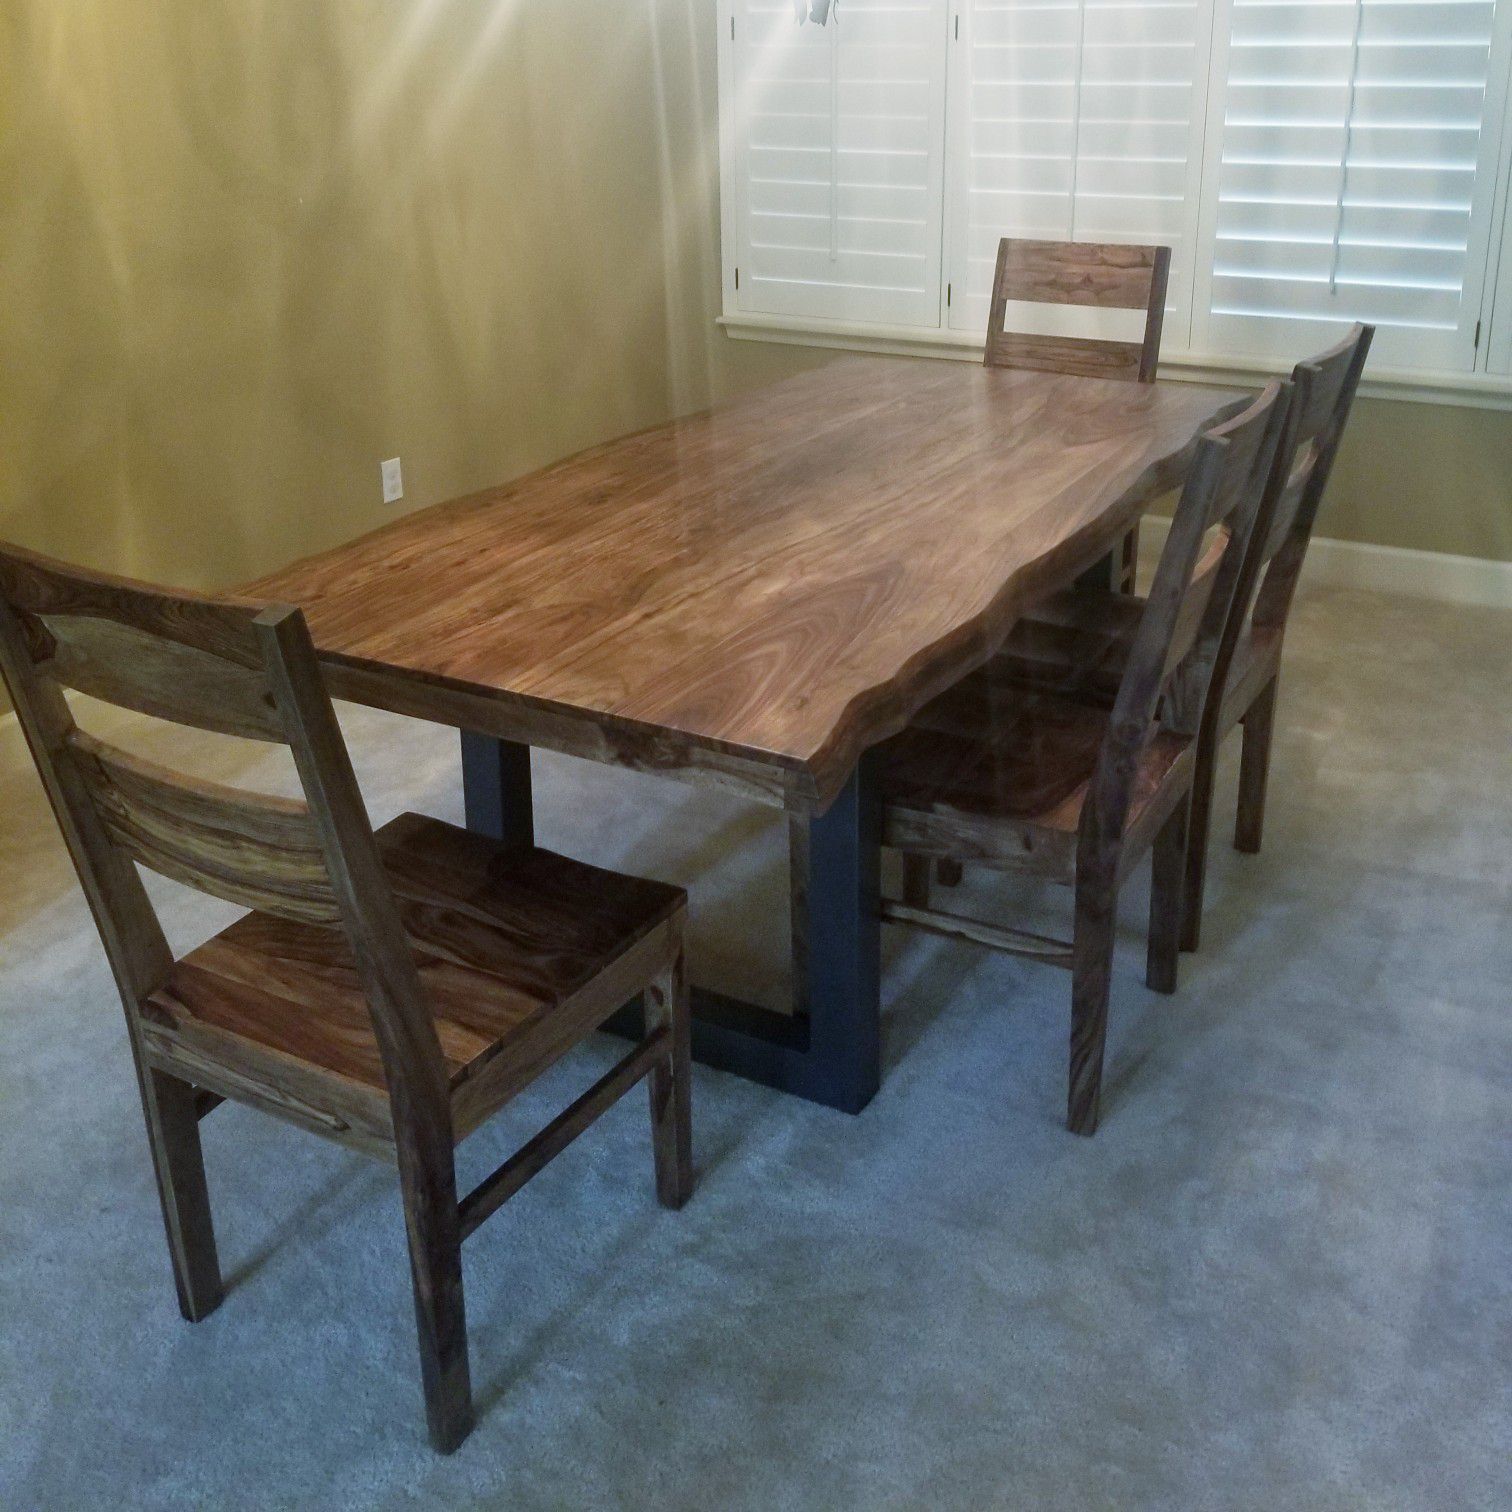 80" Solid wood & Metal base live edge dining table with bench and 4 chairs